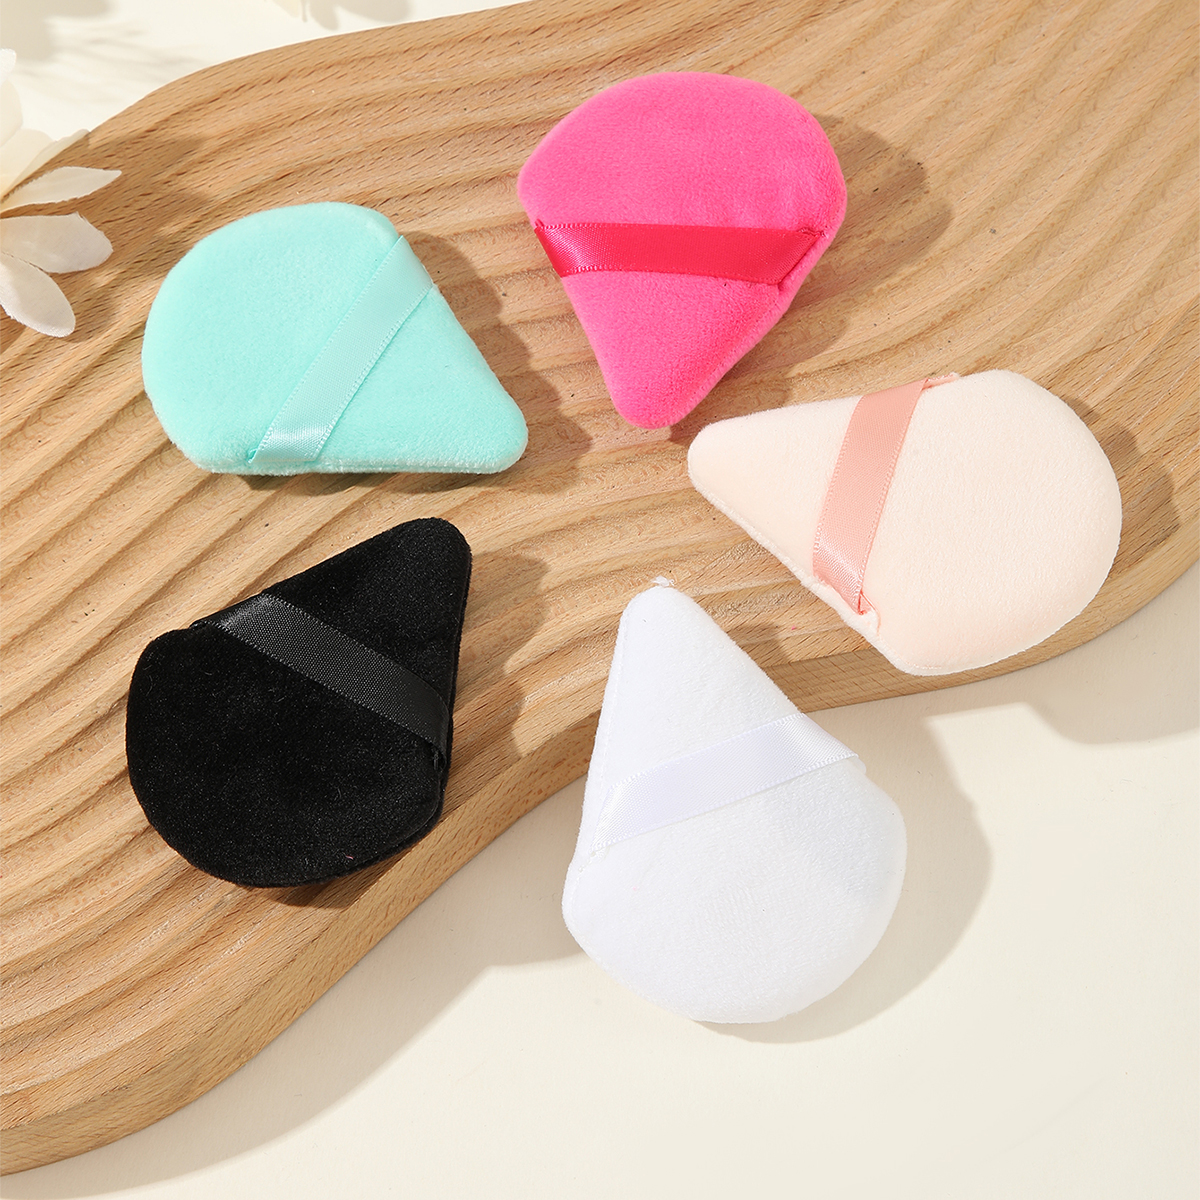 5 Colors Mixed Triangle Scalloped Puff Makeup Powder Puff